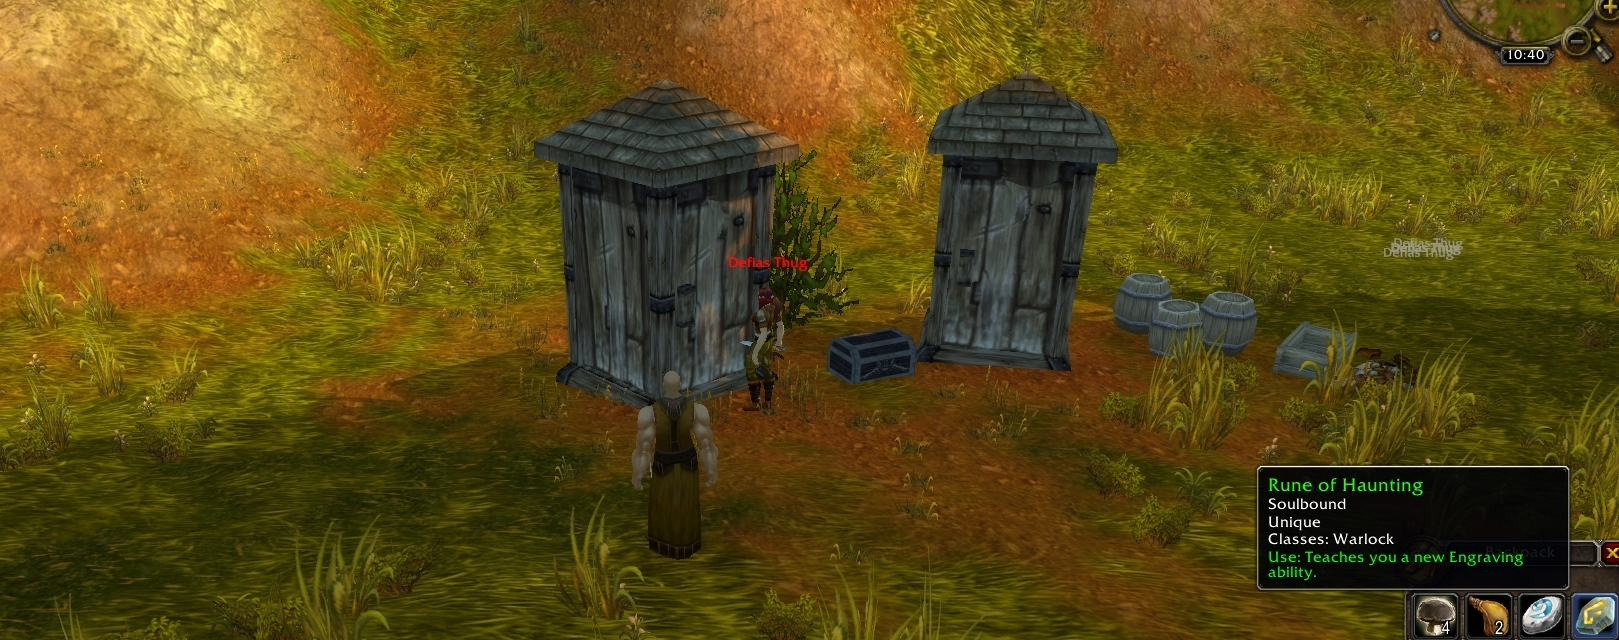 Two buildings, a thug, and a chest containing the Rune of Haunting